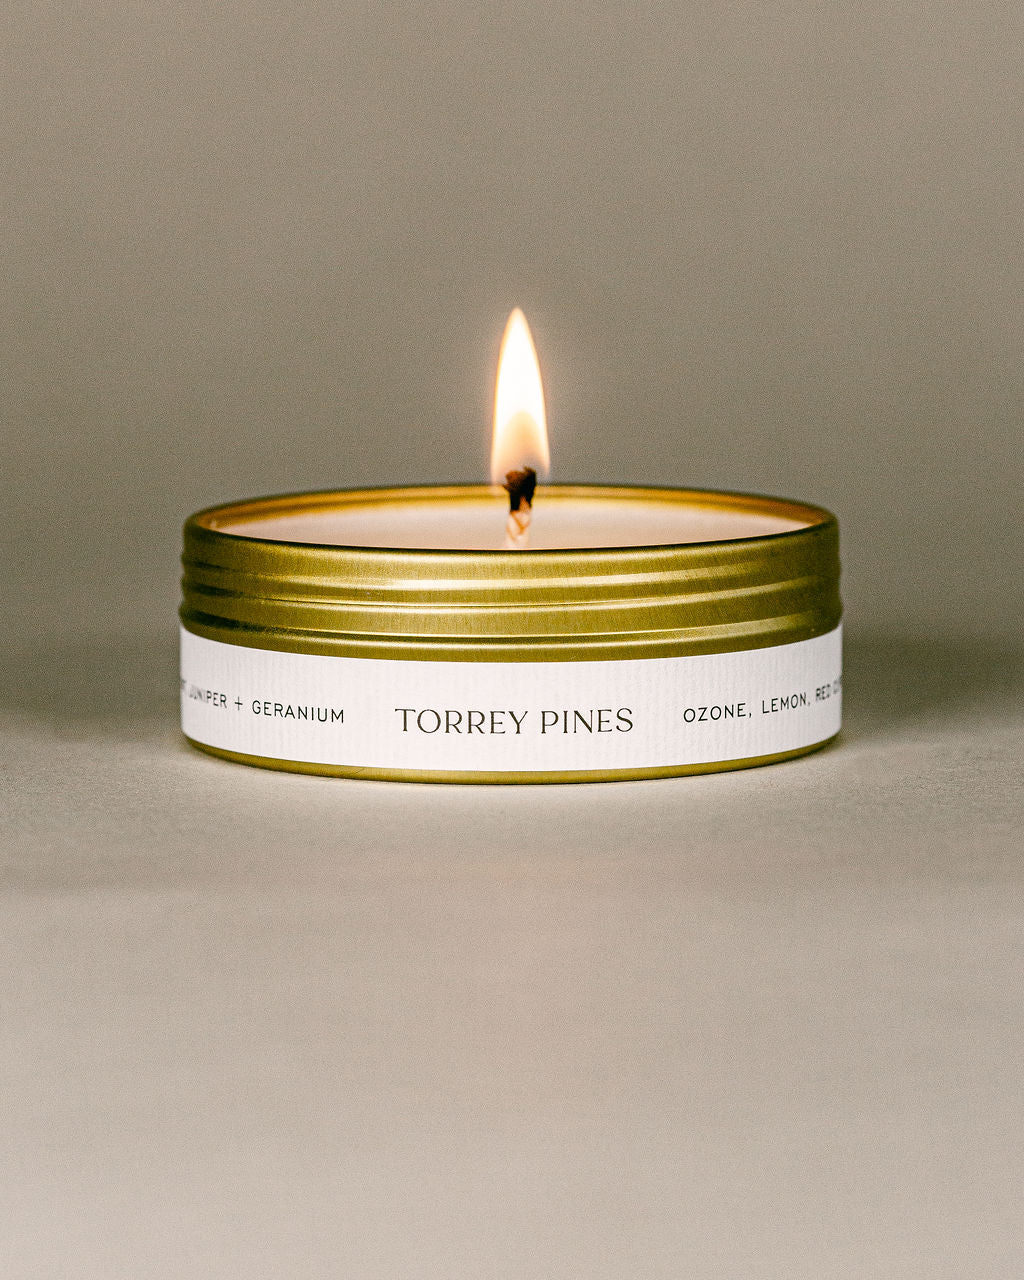 Luxe Collection Torrey Pines Soy candle - Bella Vie Candles